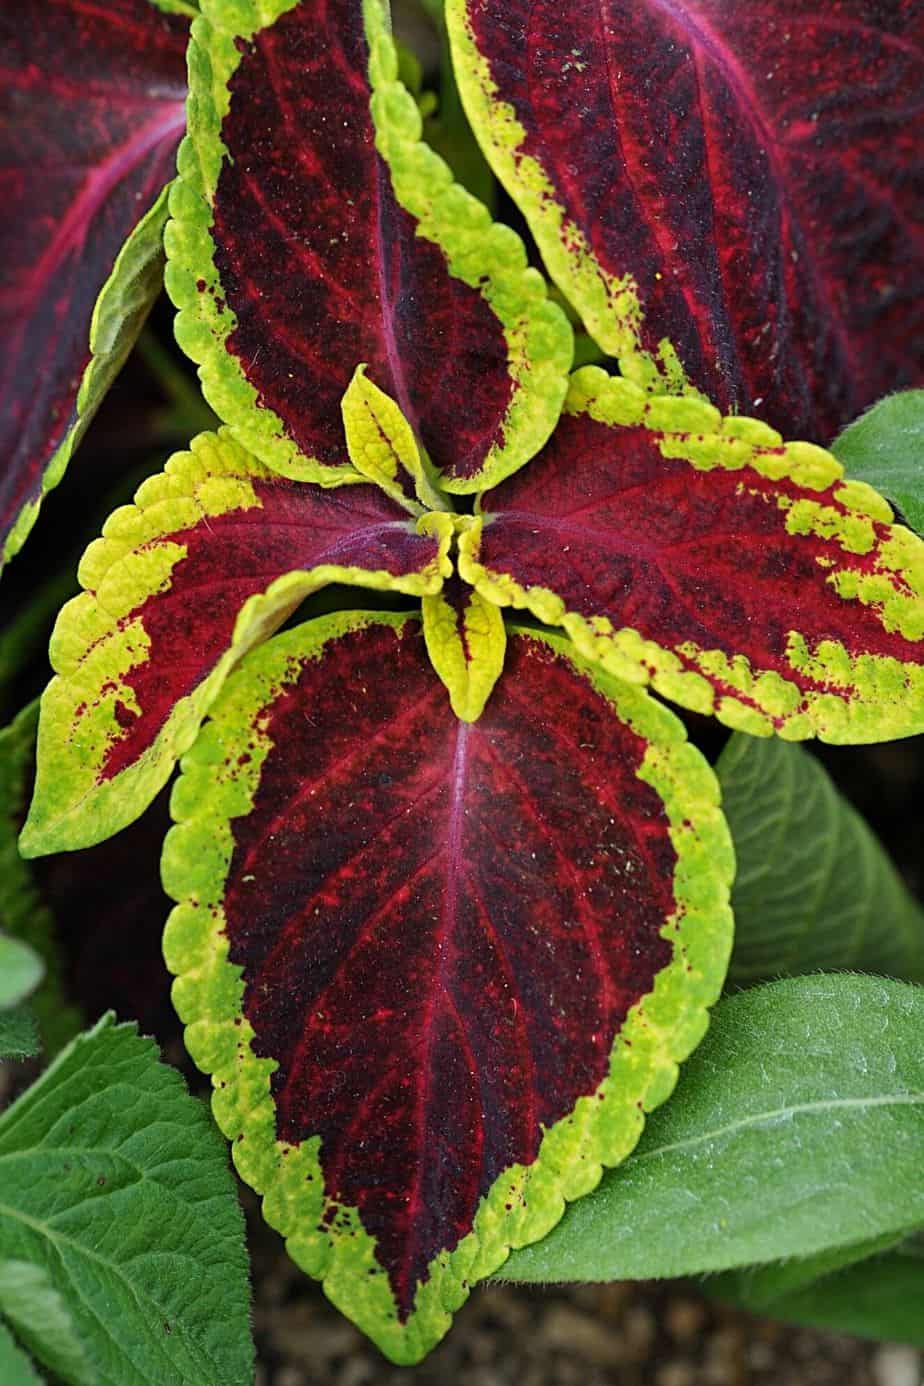 Known as a bedding plant, Coleus is another plant that you can grow in your north-facing balcony